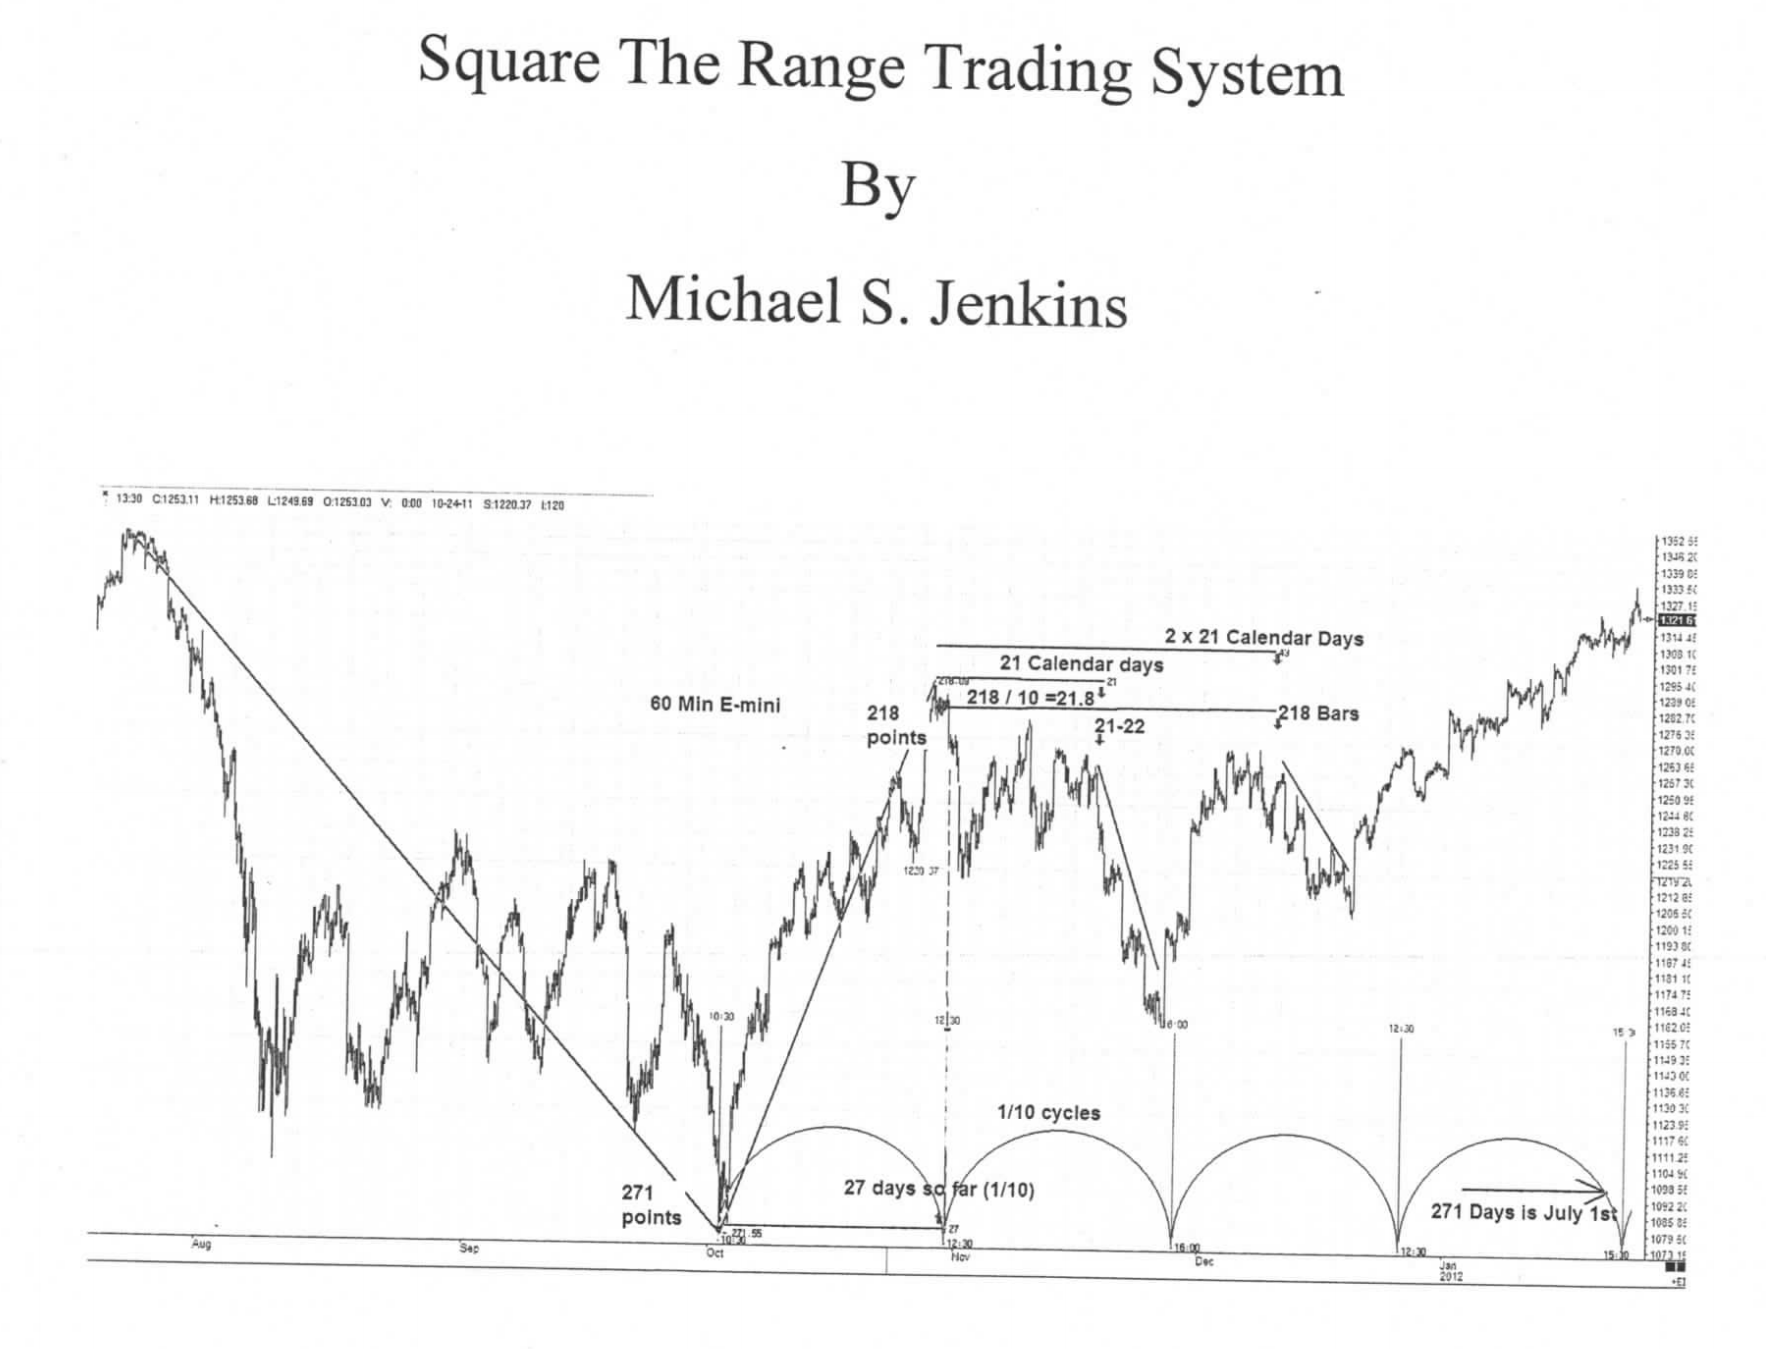 Square The Range Trading System By Michael S. Jenkins